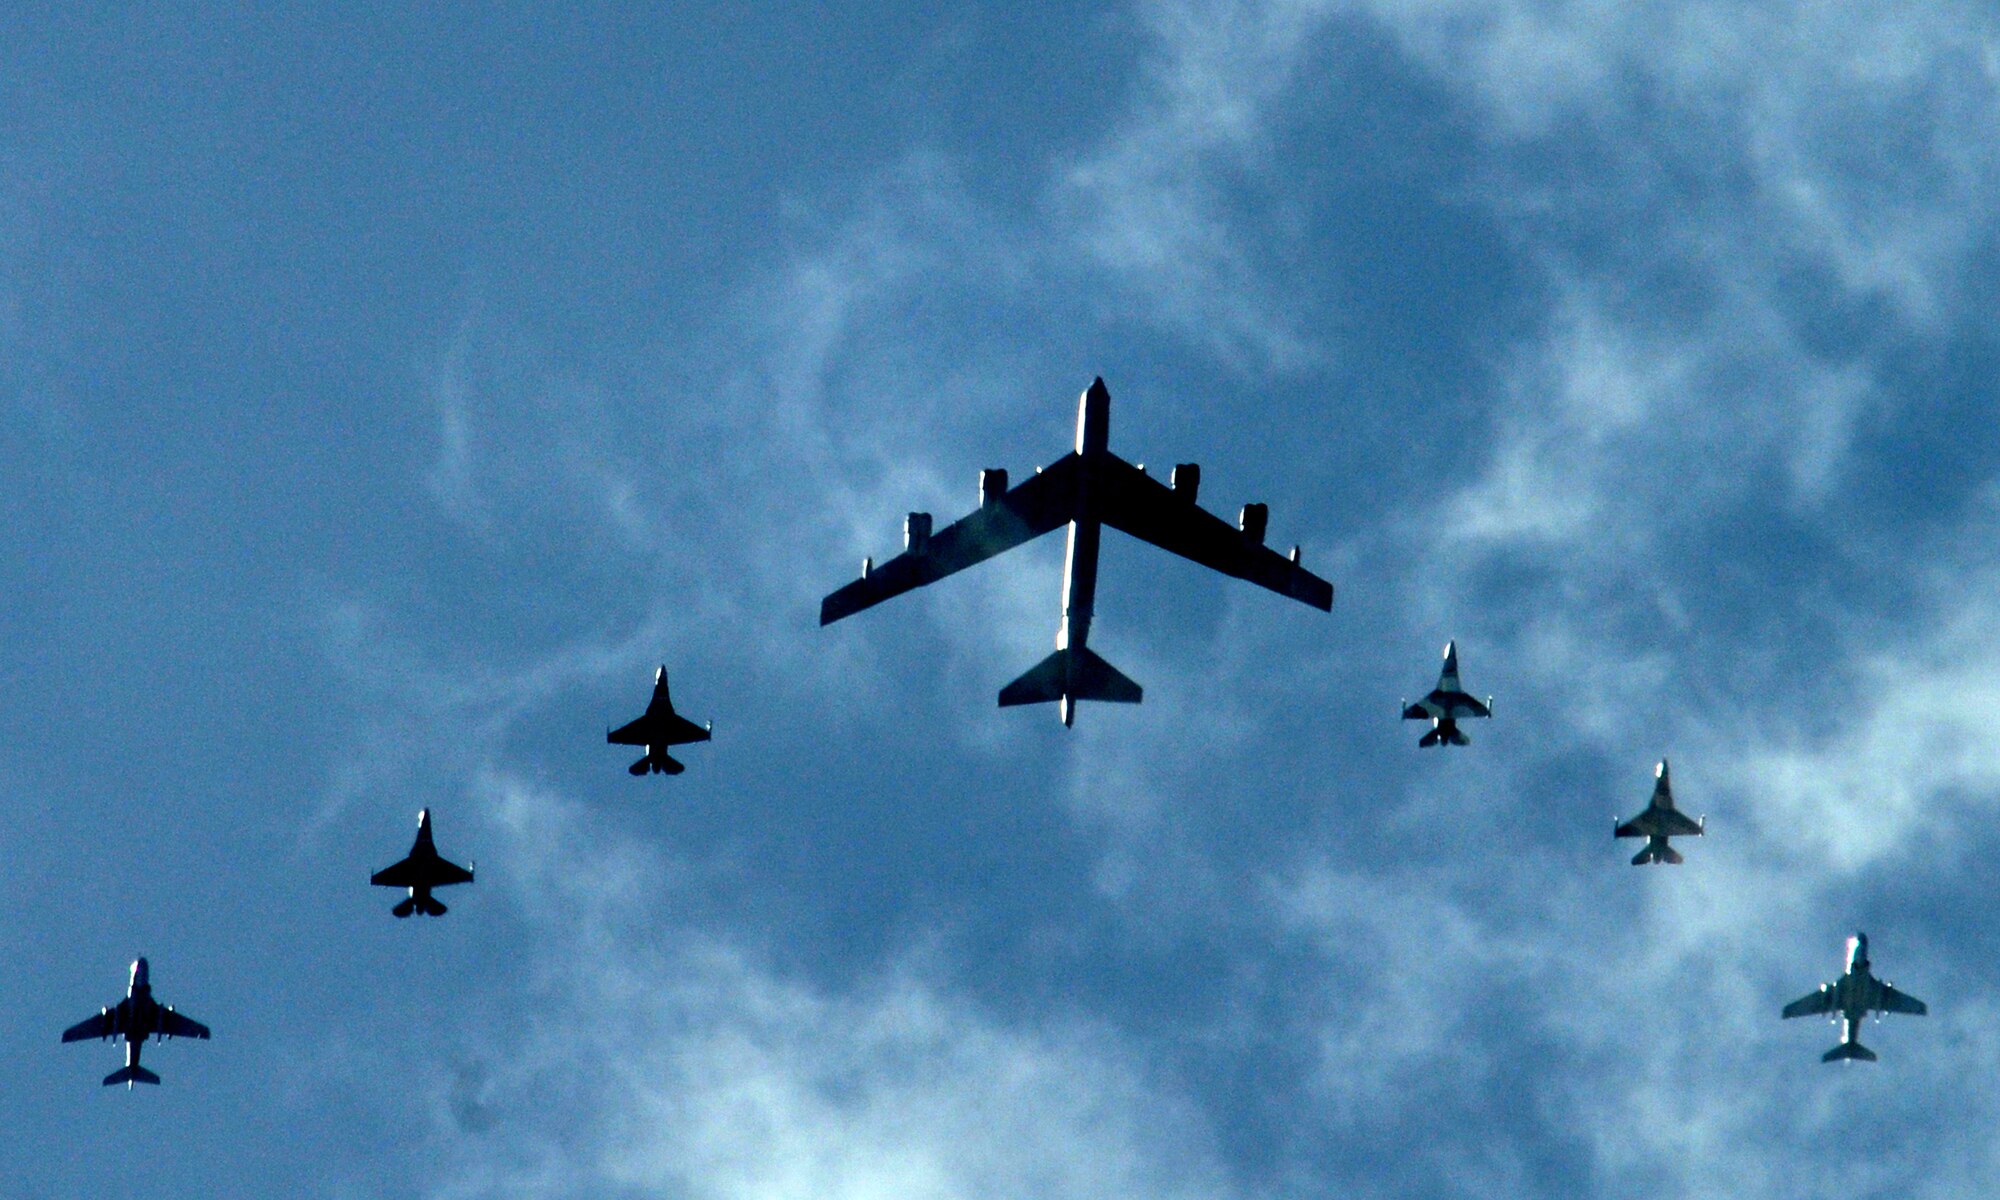 A B-52 Stratofortress leads two Japan Air Self Defense Force F-2s, two Navy EA-6Bs, and two F-16 Fighting Falcon Aggressors, in a fomration flight over Guam during Cope North 09-1 Feb. 10.  Cope North is an annual bilateral exercise between U.S. and Japanese forces held at Andersen Air Force Base, Guam, designed to increase interoperability between the two forces in defense of Japan. (U.S. Air Force photo by Senior Airman Ryan Whitney)